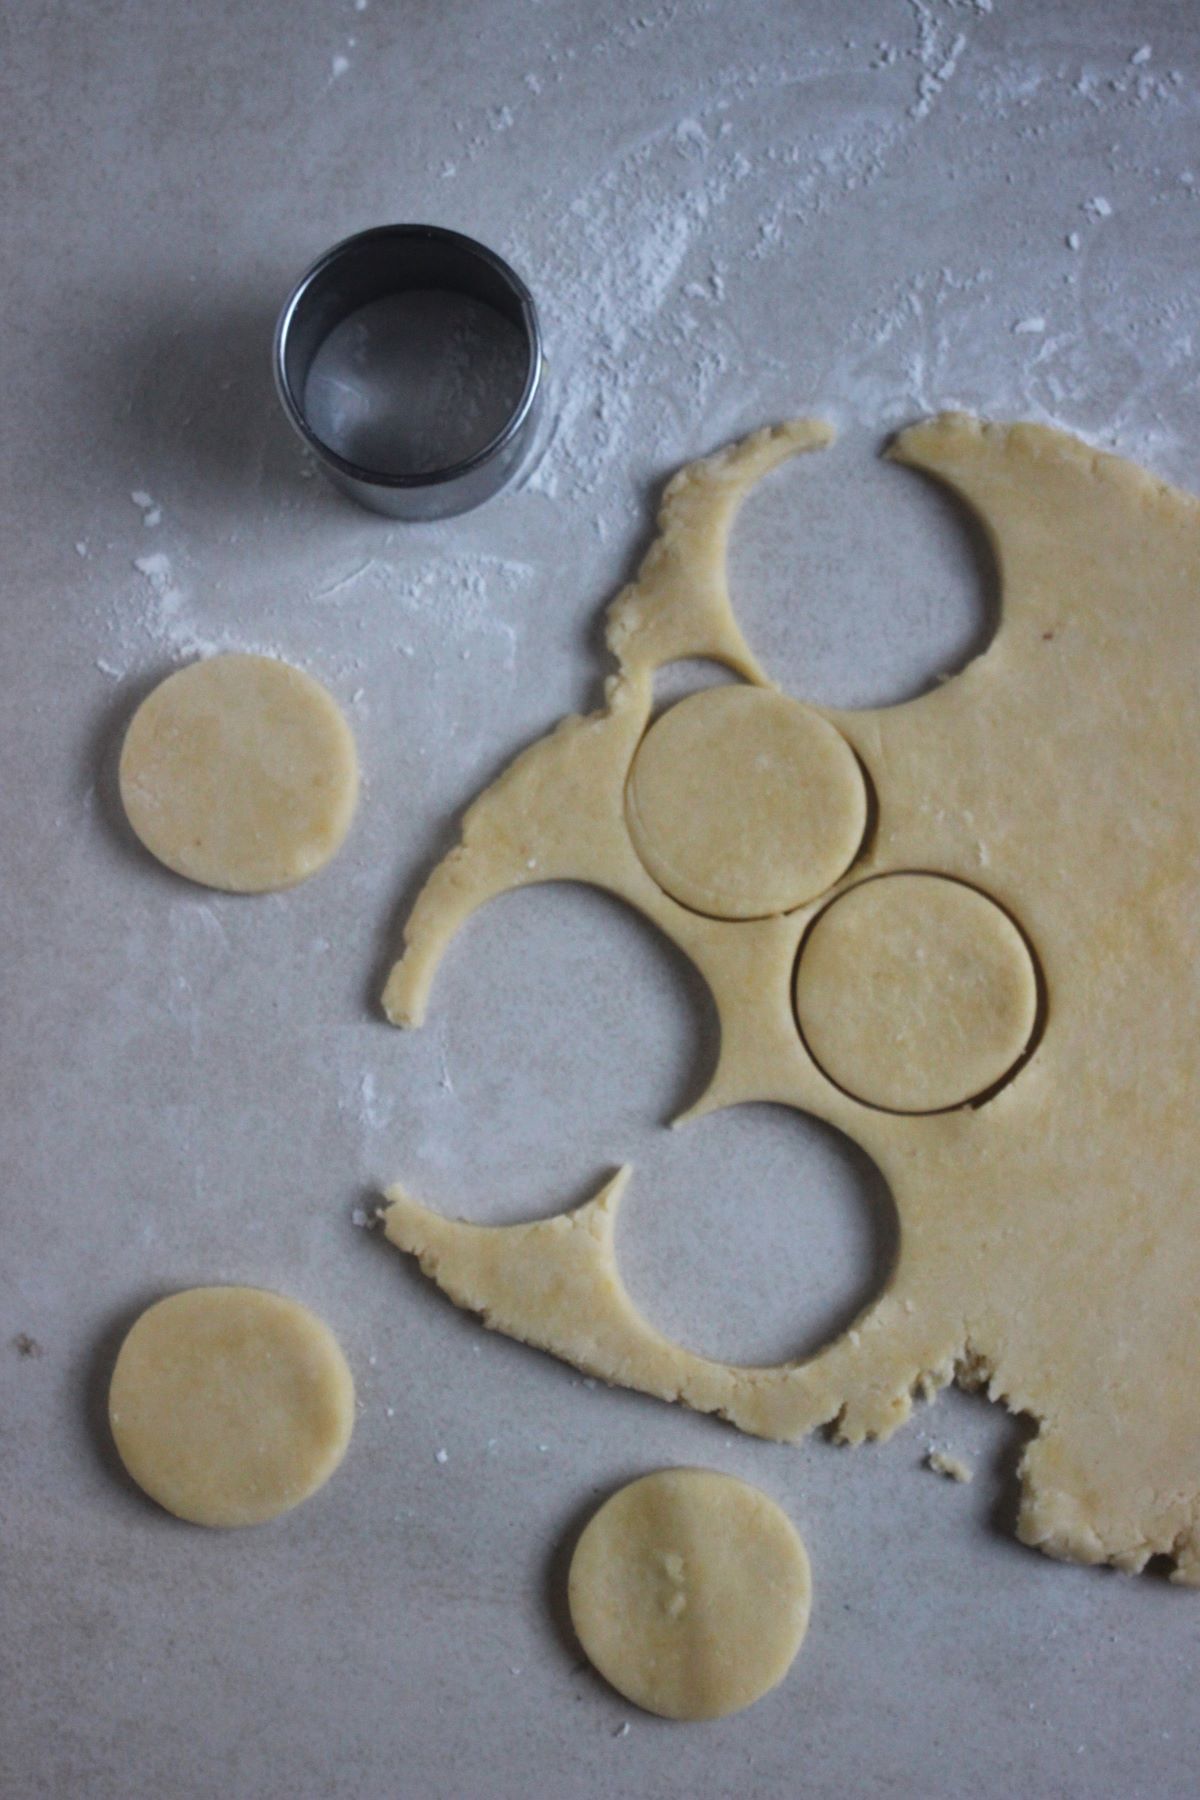 Alfajor dough stretched on a white surface, a cutter, and rounds of alfajor dough cut.